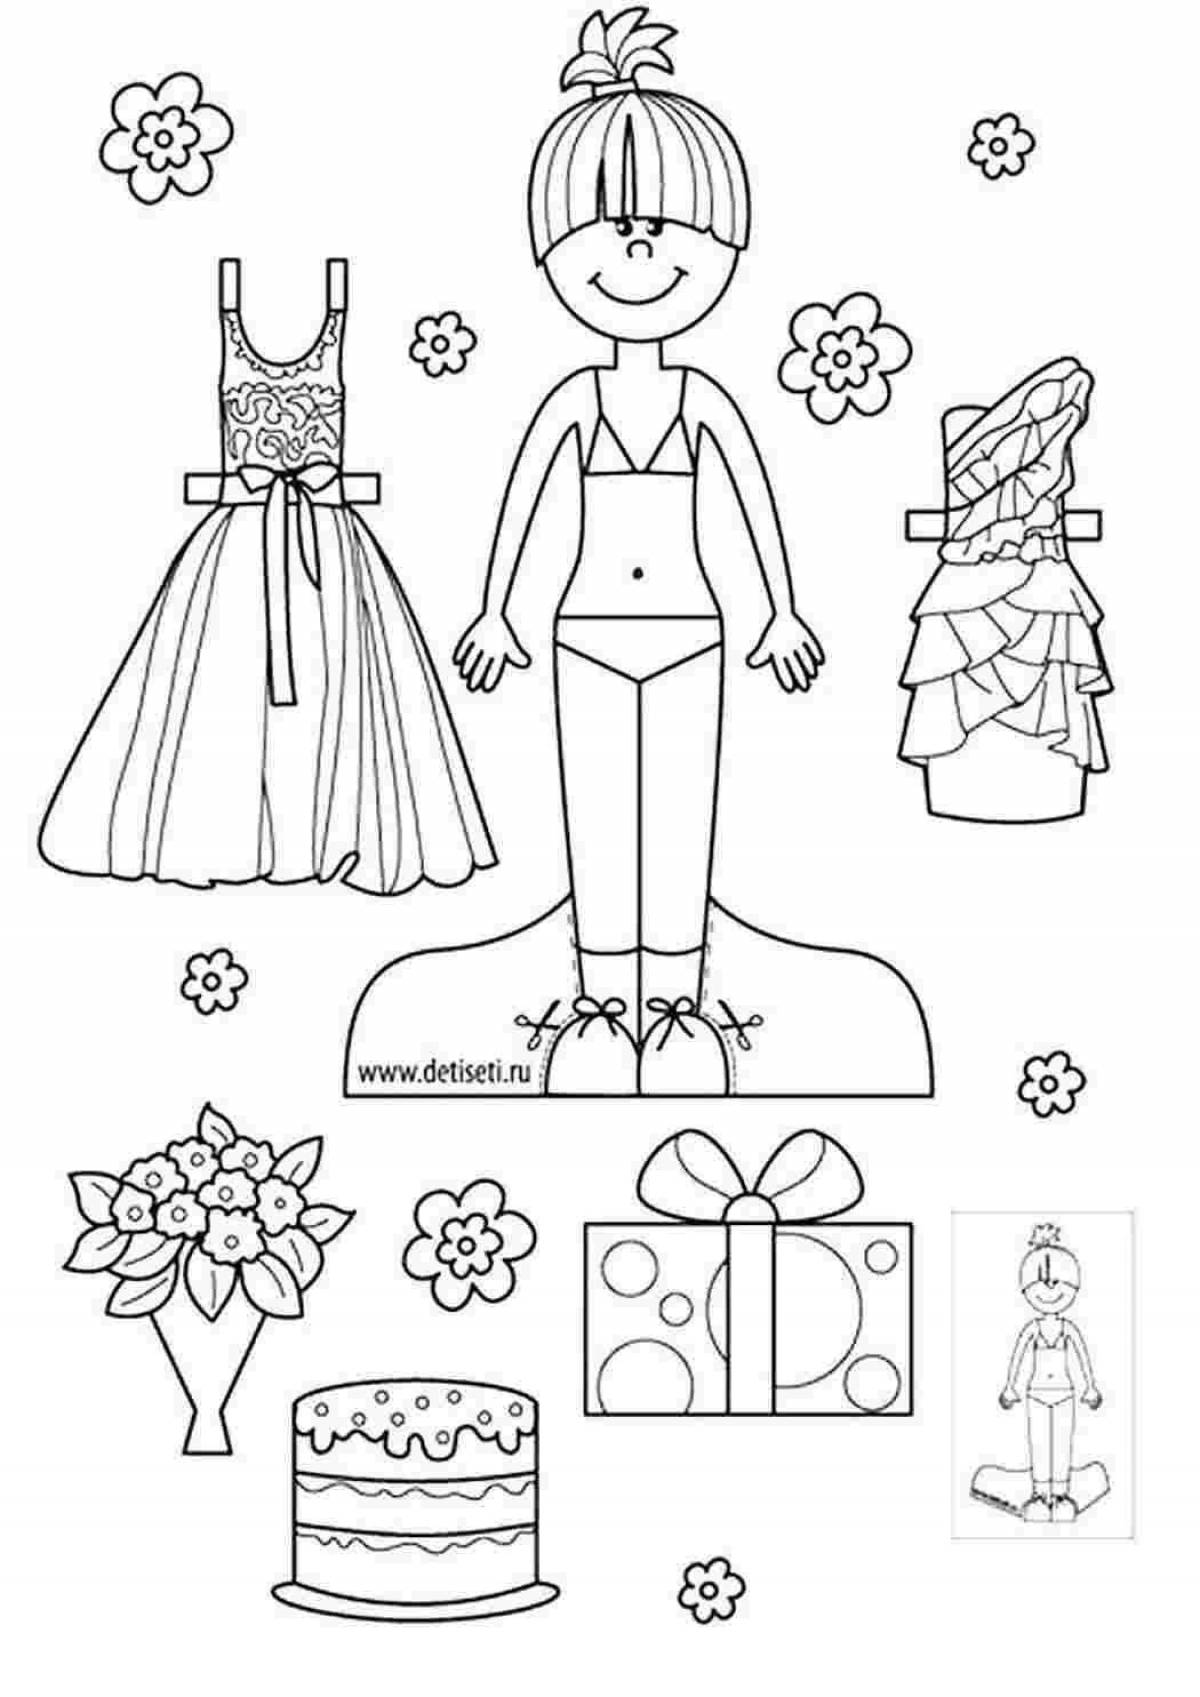 Adorable paper dolls for girls